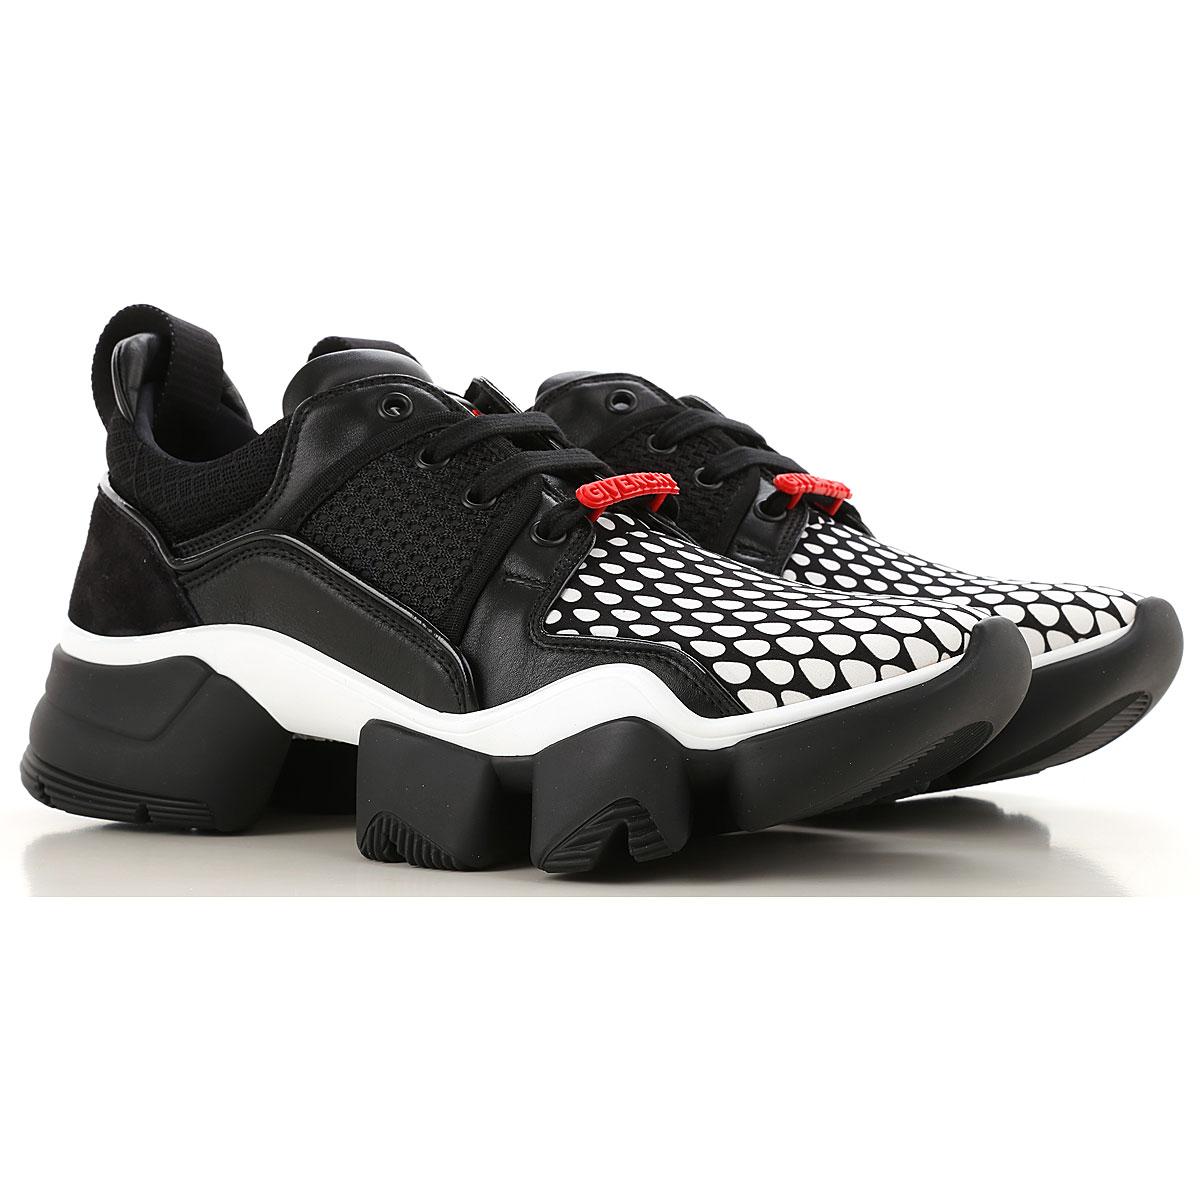 Givenchy Synthetic Sneakers For Men On Sale in Black for Men - Lyst